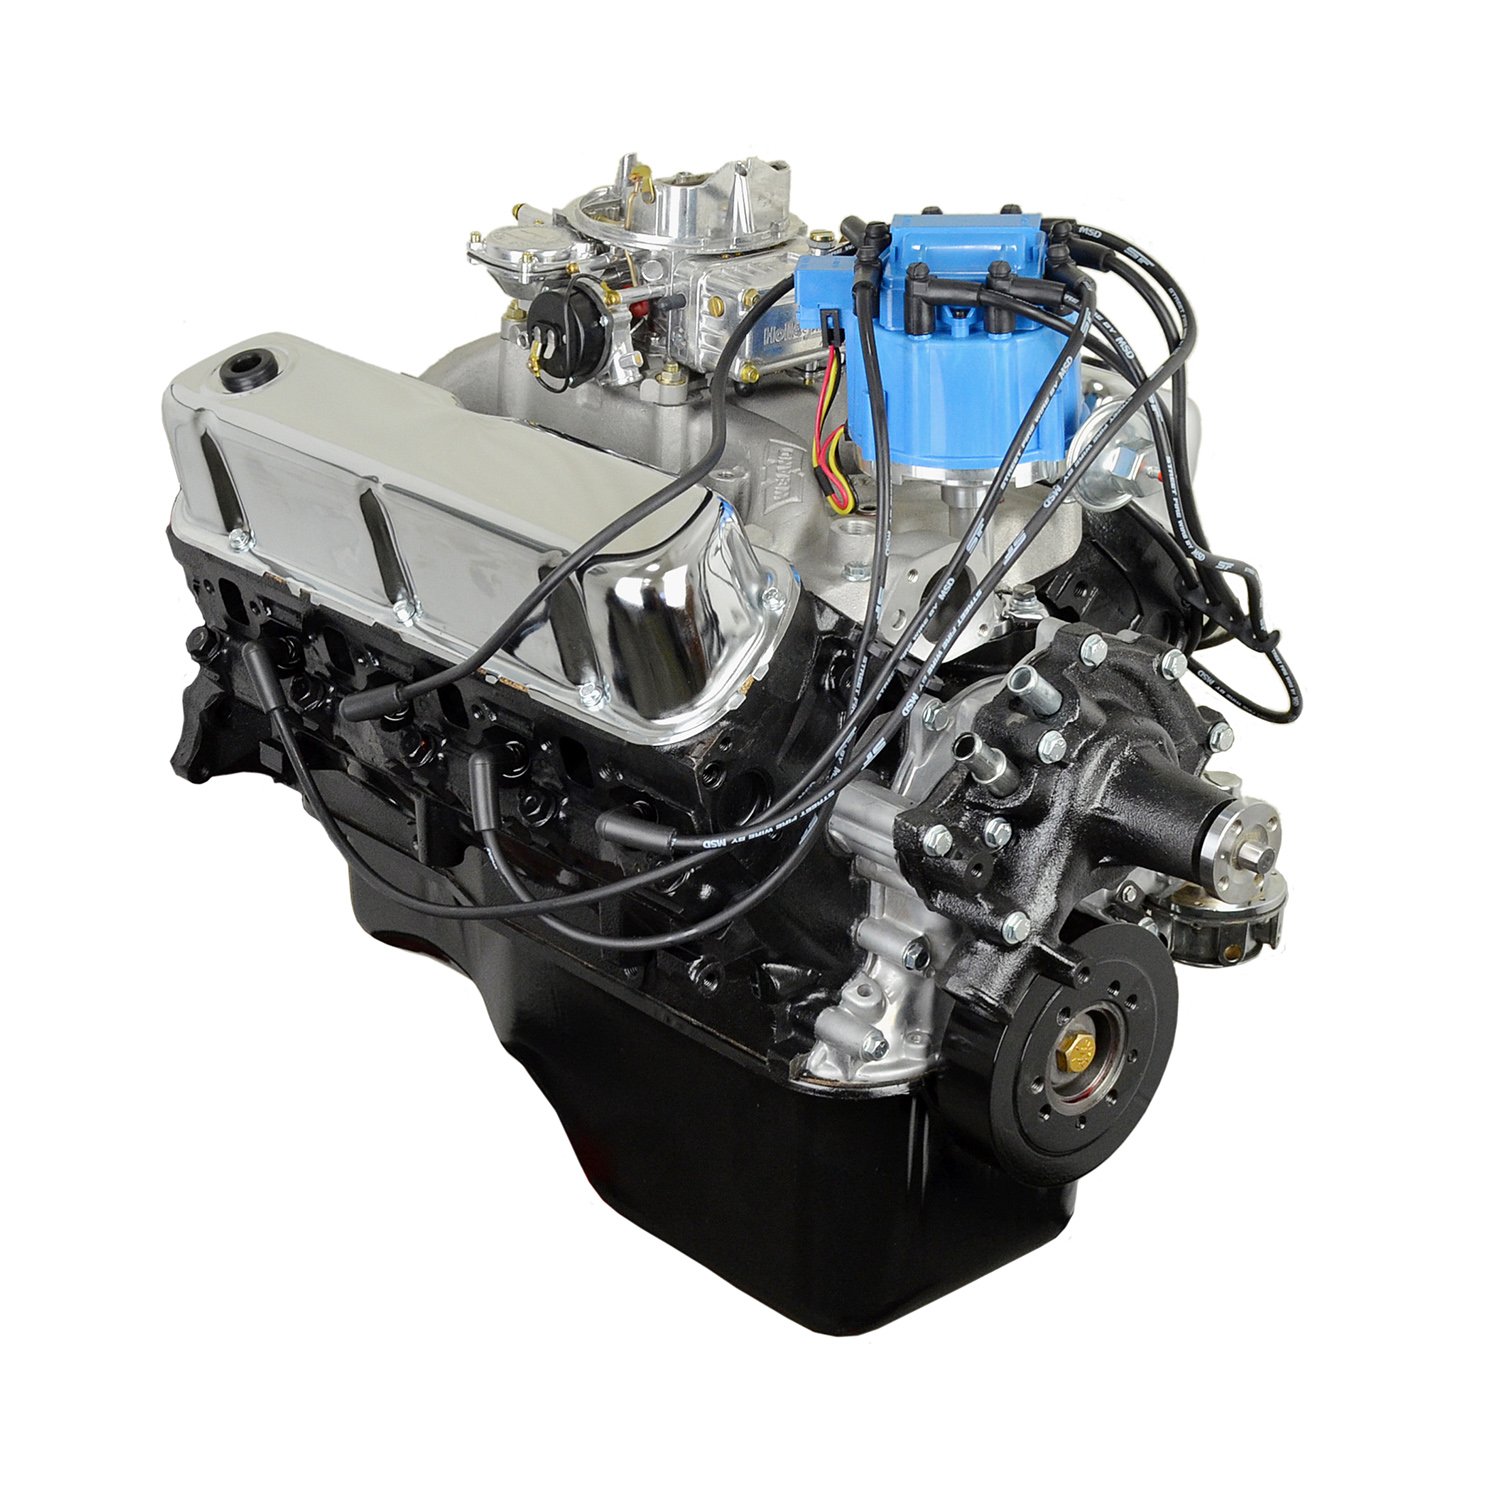 HP Drop In Crate Engine Small Block Ford 302ci / 240HP / 325TQ